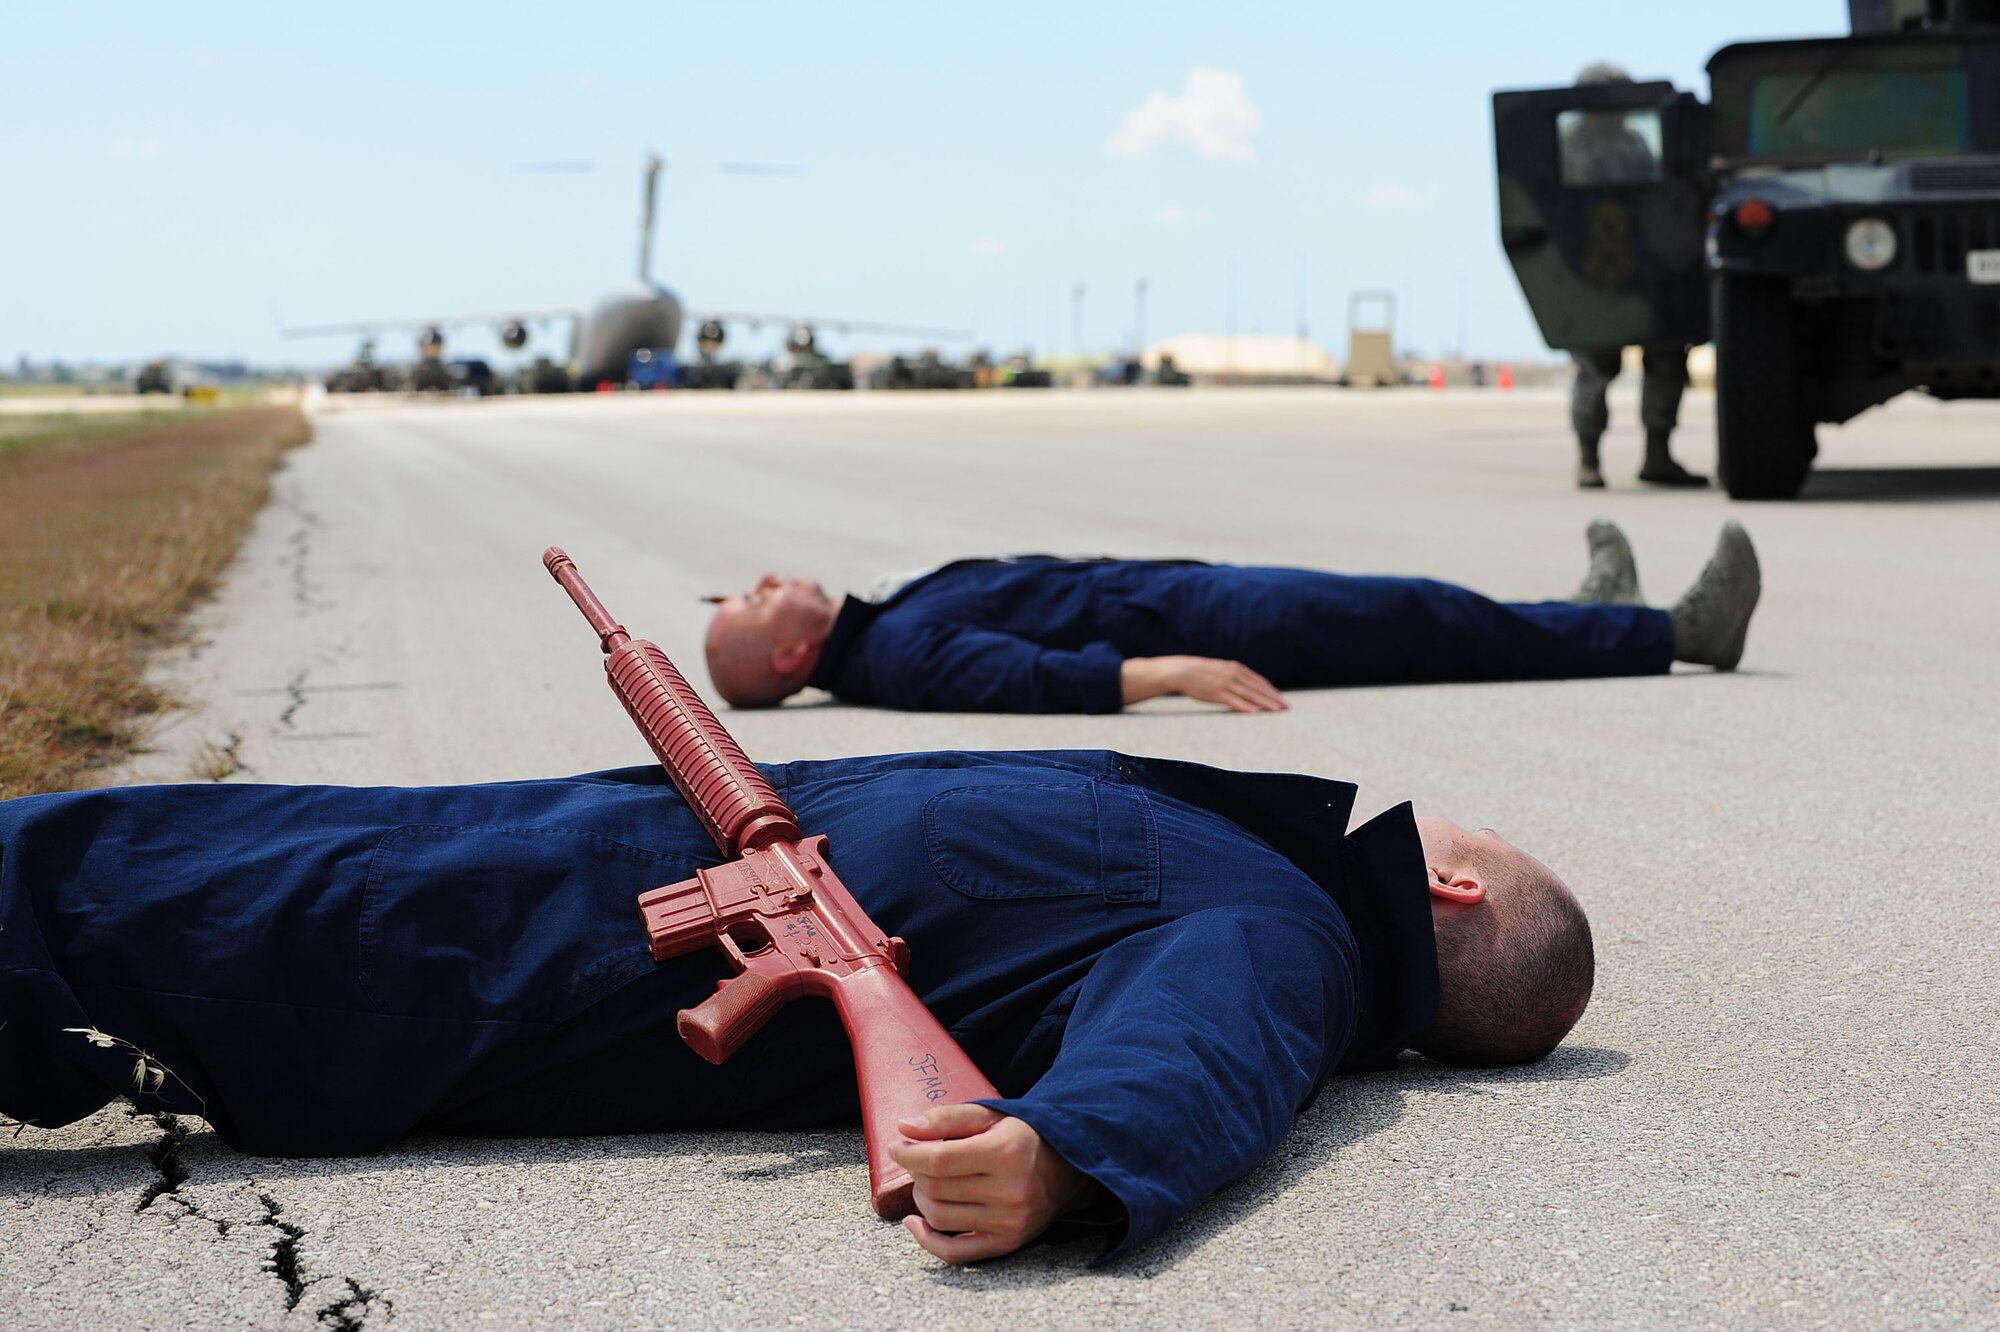 Master Sgt. Meza Santos and Tech. Sgt. Jonel Relojo, both United States Air Forces in Europe inspector general team members, lay on the ground after a simulated ground attack May 1, 2014, Incirlik Air Base, Turkey.  The USAFE IG team visited Incirlik AB to conduct a readiness inspection of the 39th Air Base Wing.  (U.S. Air Force photo by Senior Airman Nicole Sikorski/Released)